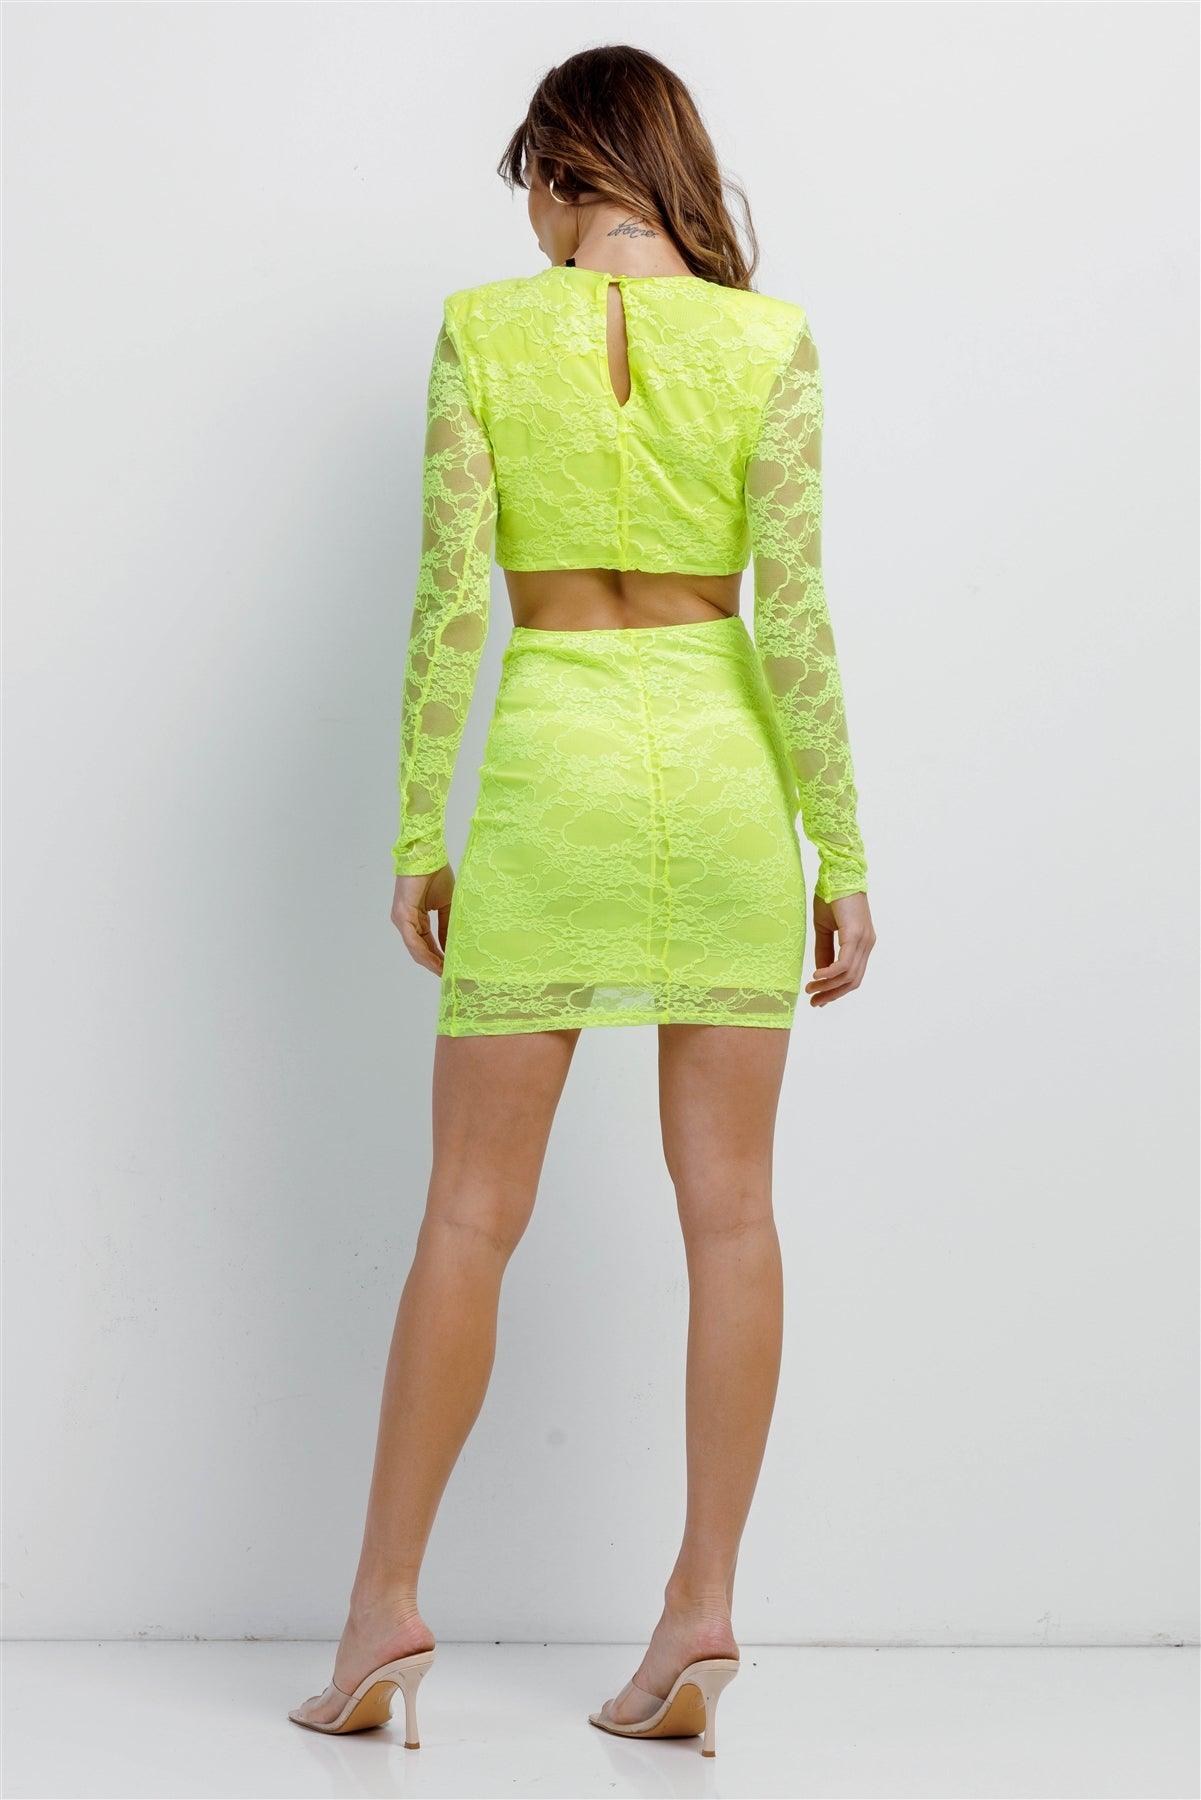 Neon Yellow Floral Lace V-Neck Long Sleeve Side Cut Out Open Back Dress Mini Dress /3-2-1